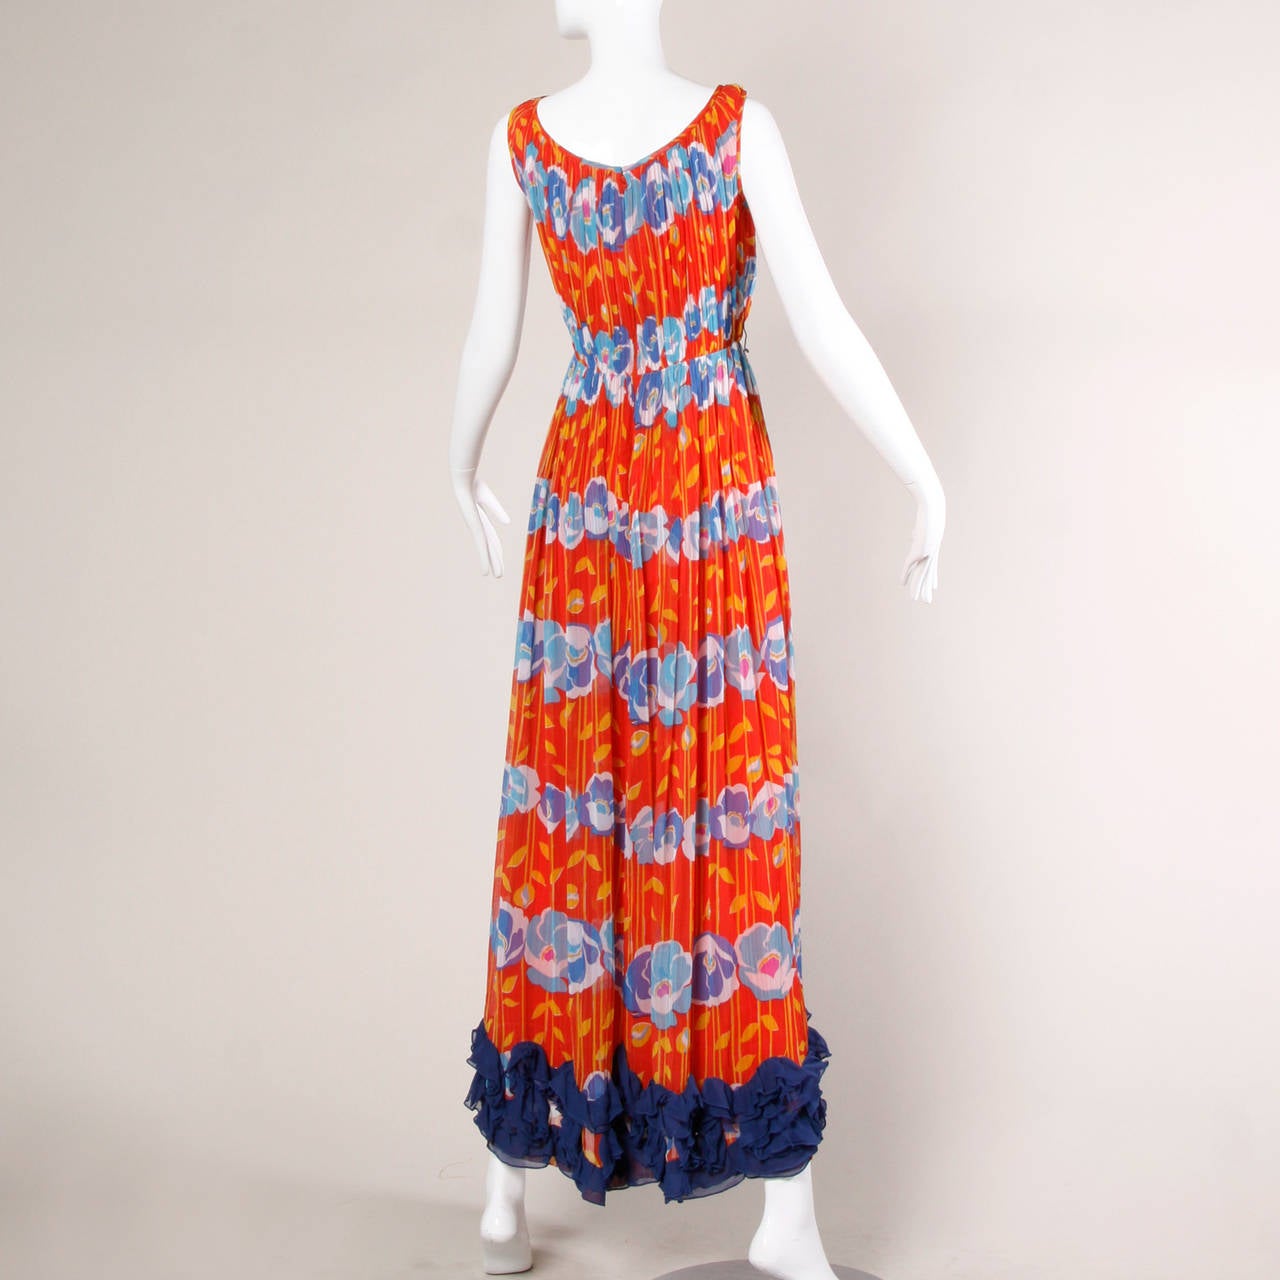 Red floral print maxi dress by Victor Costa for Romantica. Blue ruffle detail along the bottom hem of the dress.

Details:

Fully Lined
Back Zip and Hook Closure
Marked Size: 10
Estimated Size: Medium
Color: Bright Red, Yellow, Blue and